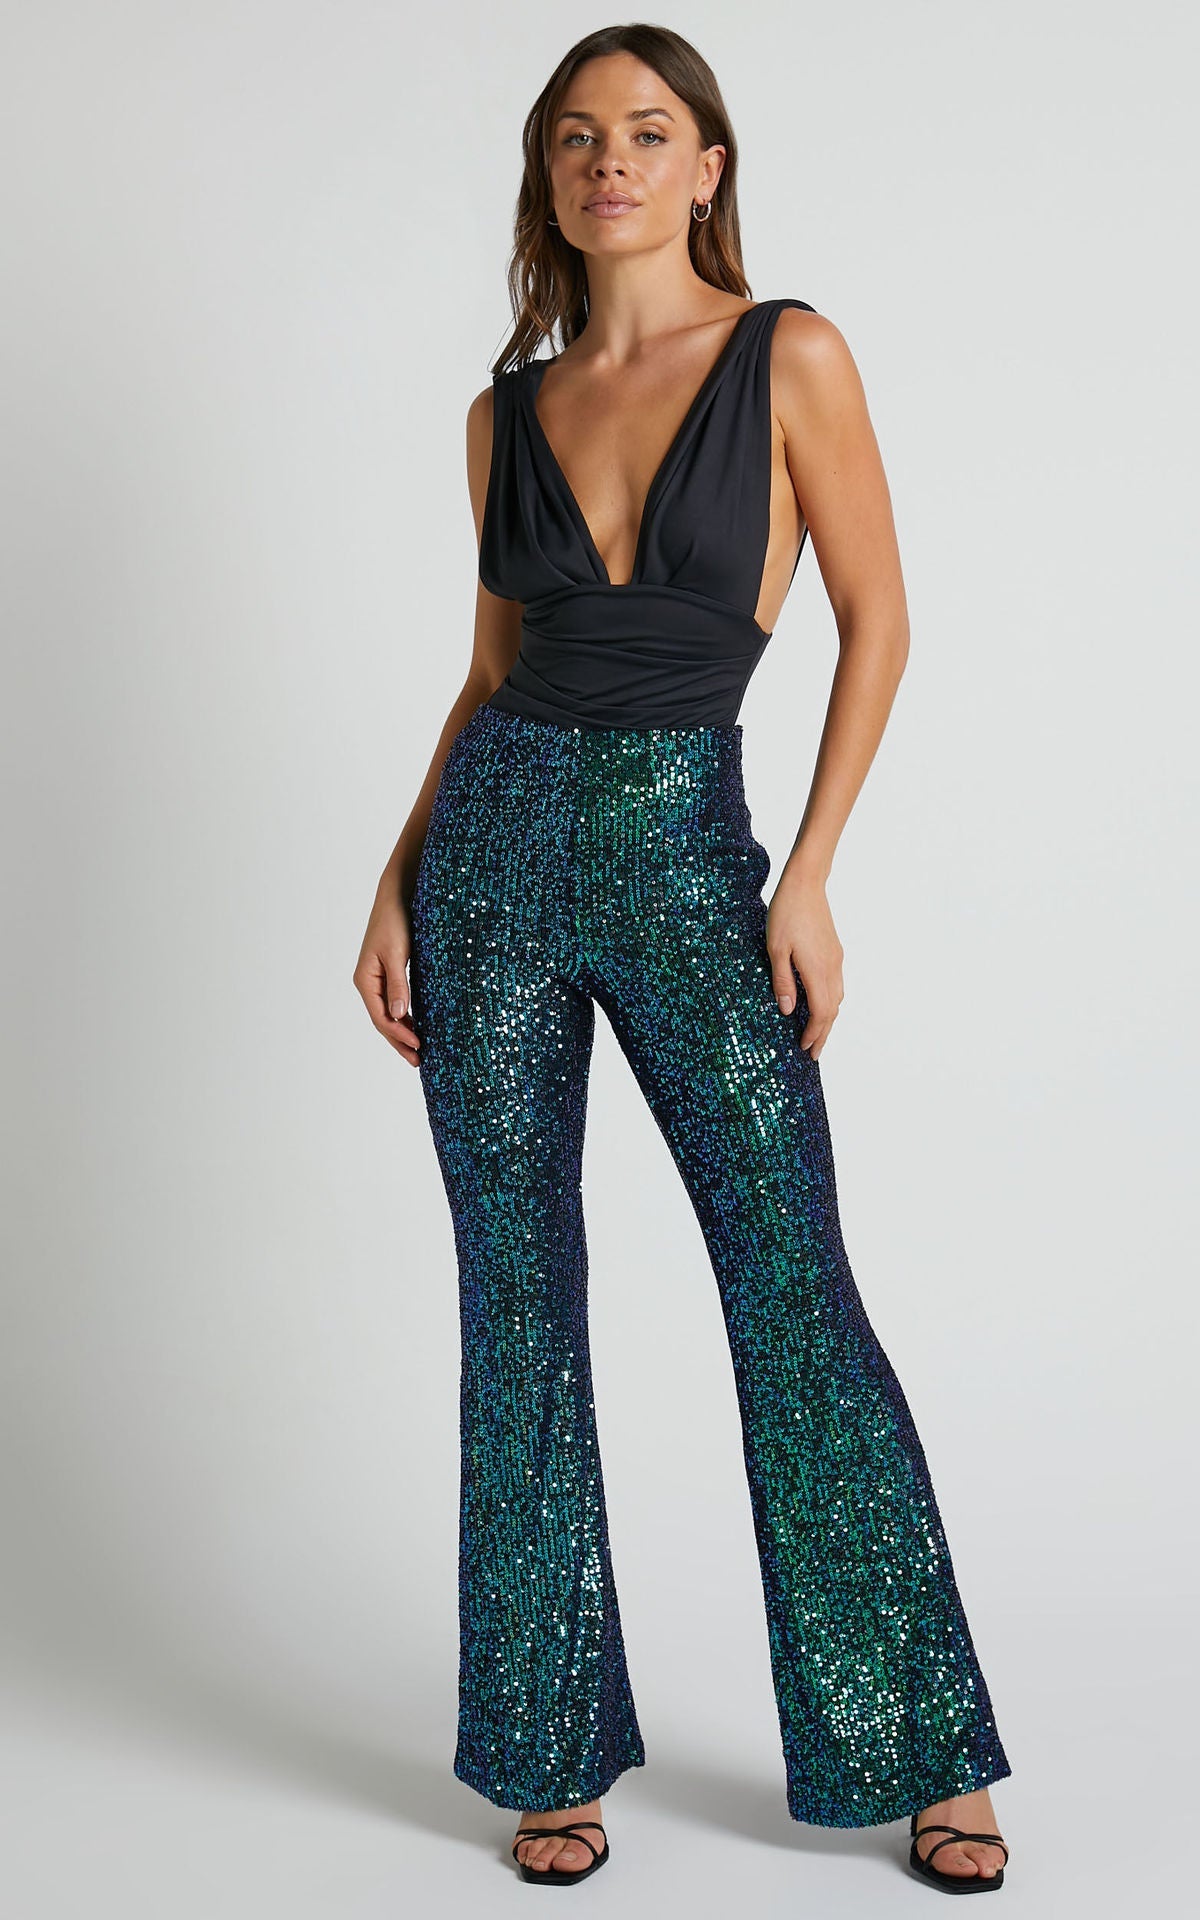 Fashion High Waist Sequined Trumpet Pants for Women-Pants-White-S-Free Shipping Leatheretro